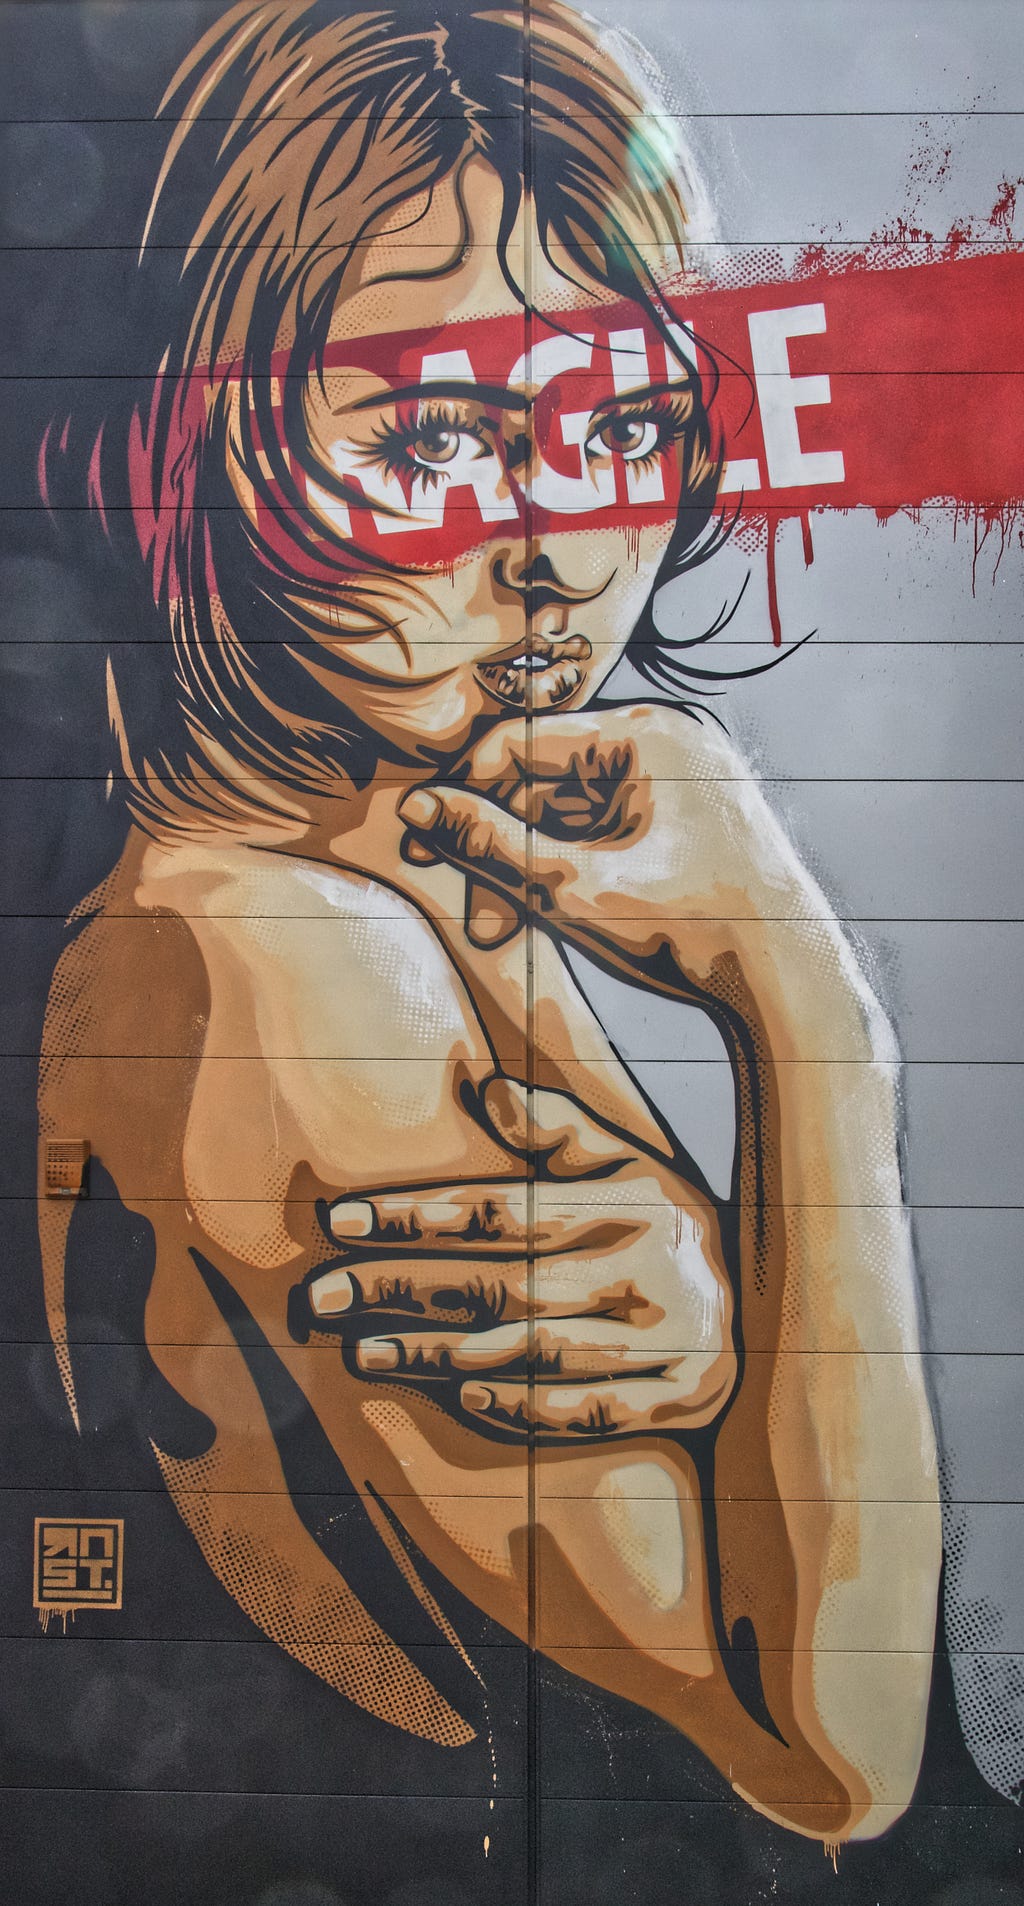 Graffitti art of a women and the word fragile